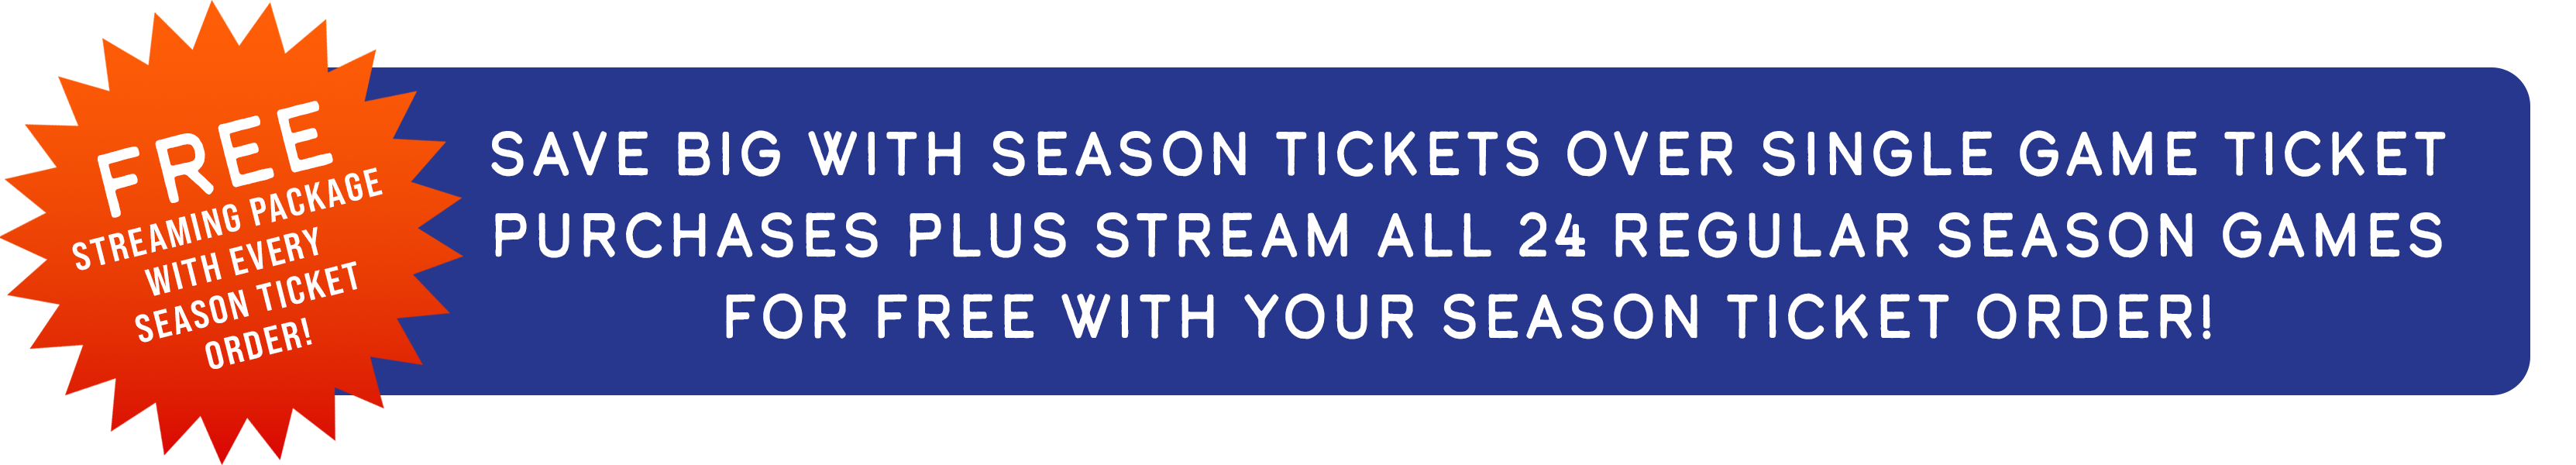 Save BIG with season tickets over single game ticket purchases plus stream all 24 regular season games for FREE with your season ticket order!